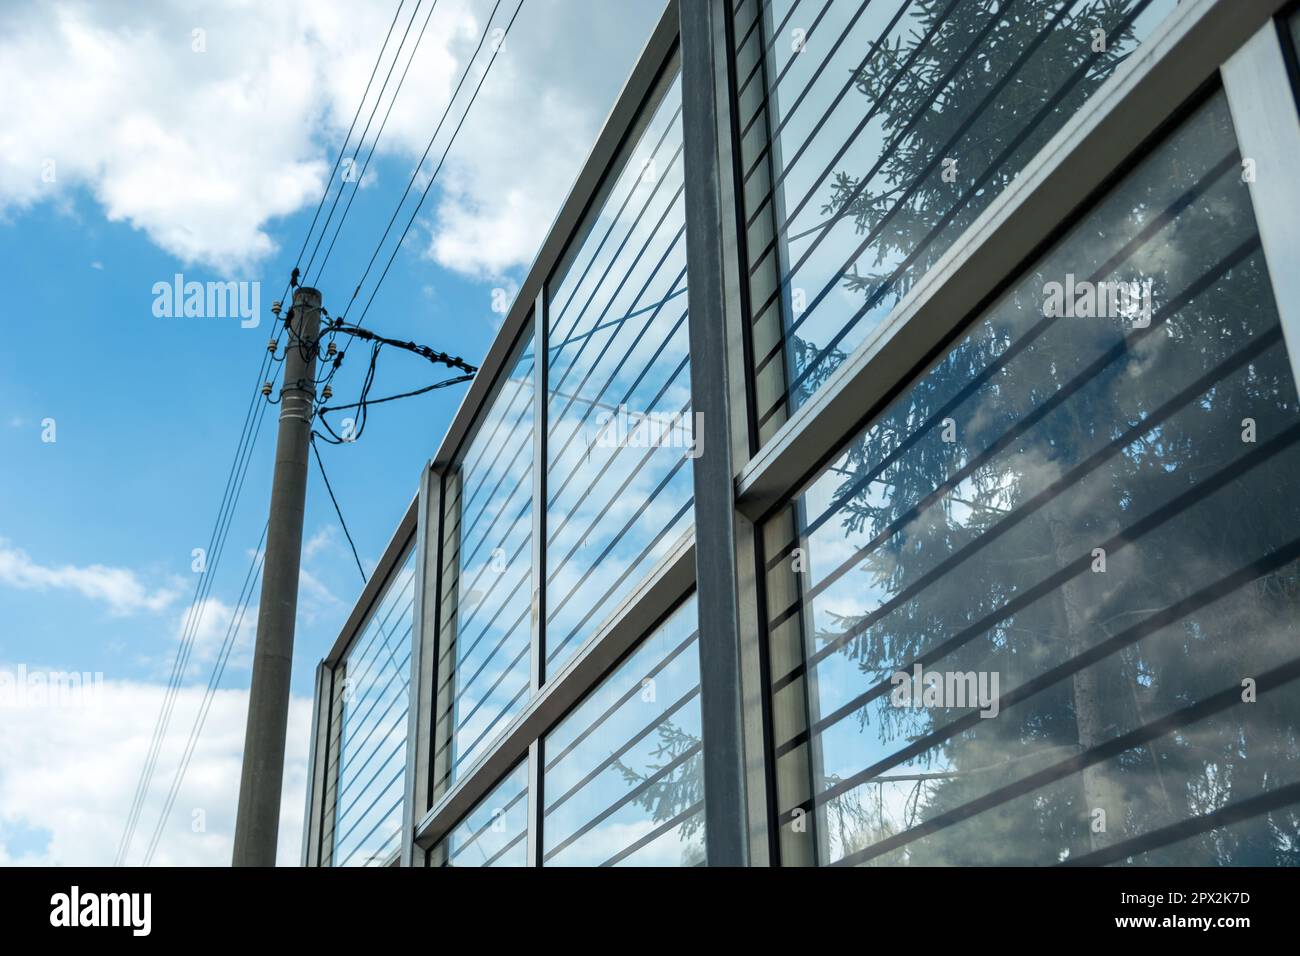 Electric pole standing by glass noise barriers and sky Stock Photo